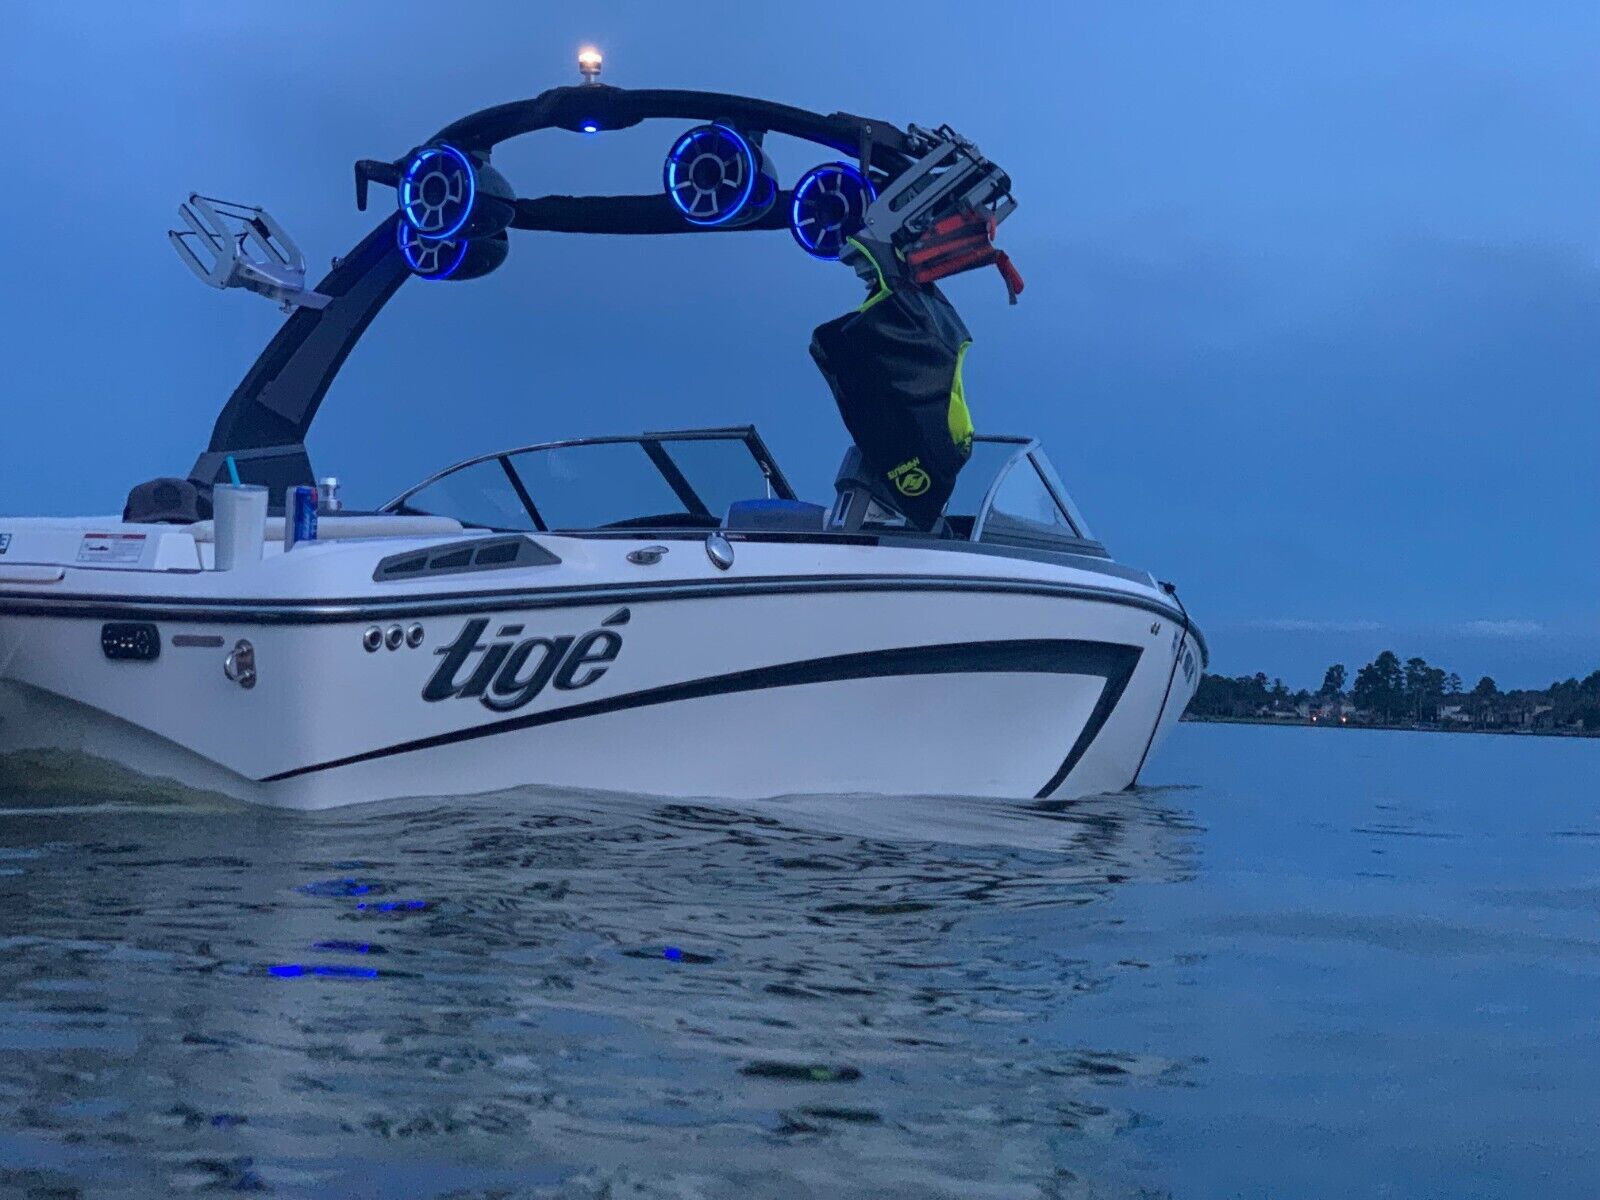 2017 Tige RZR Boat 2017 for sale for $95,000 - Boats-from-USA.com